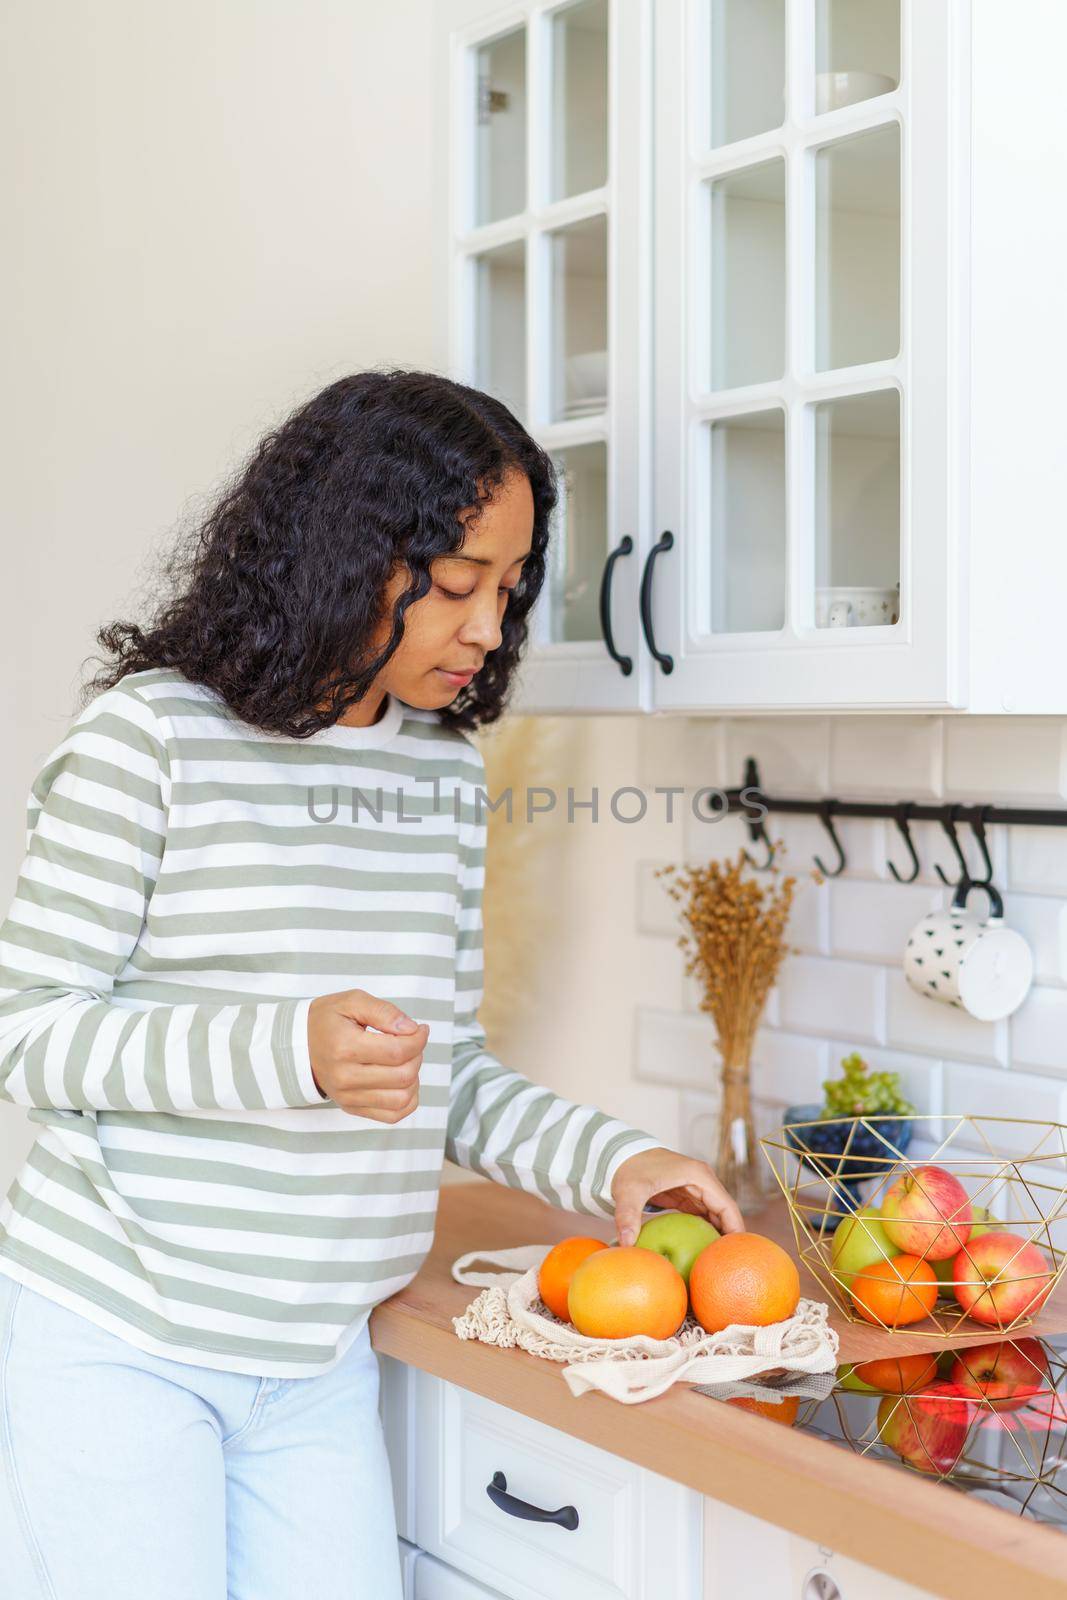 Female African-American woman taking out fruit bought at grocery store. Using eco-bags for shopping trips. Concept of healthy food and eco-friendly sustainable lifestyle